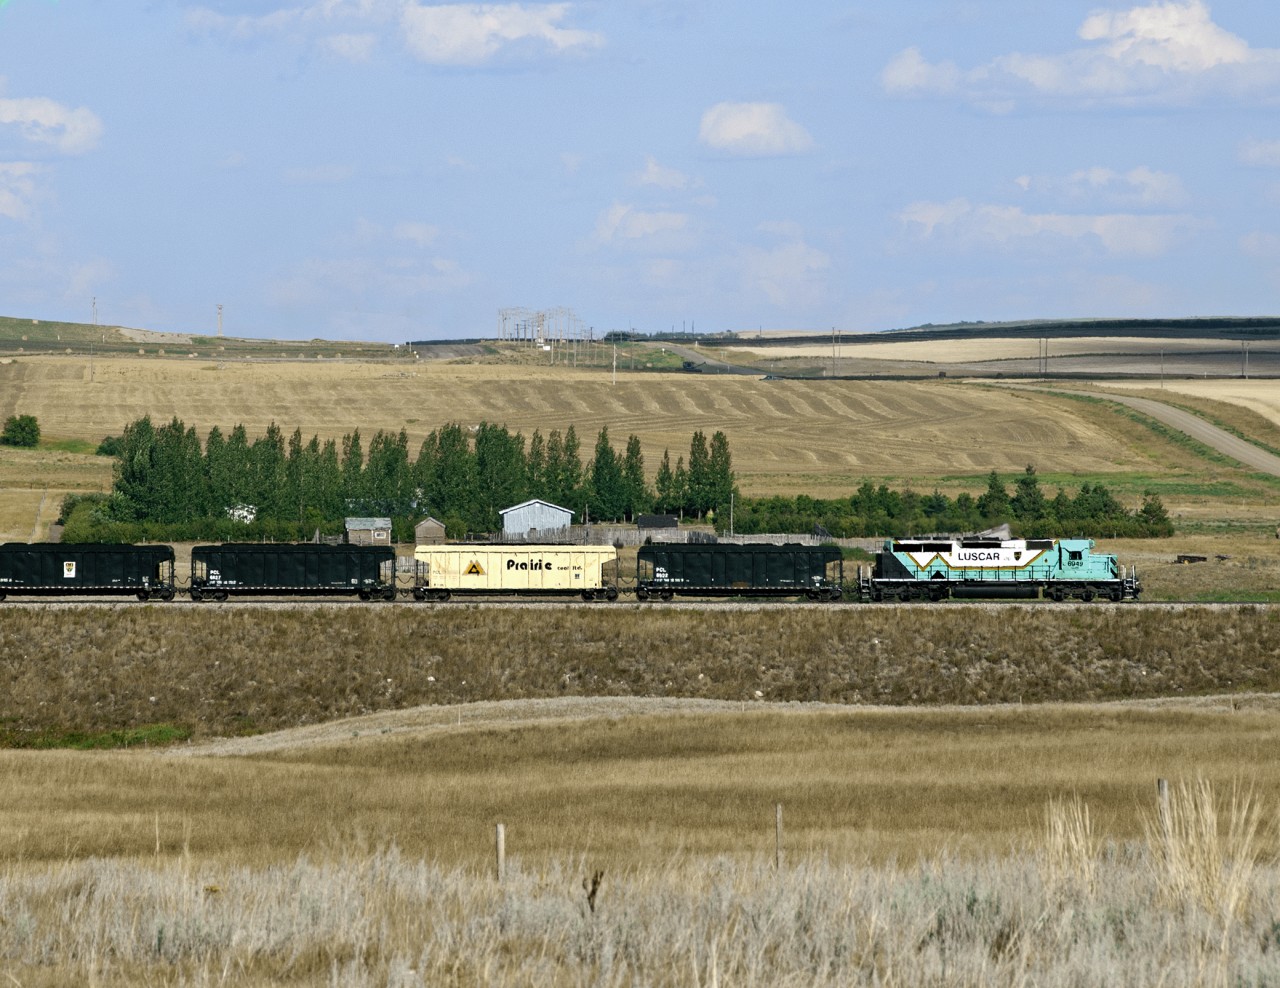 Having just loaded coal at the mine, Luscar Coal's shuttle heads south over a five mile line to the Saskatchewan Power Co. station just east of Coronach in the Poplar River Valley